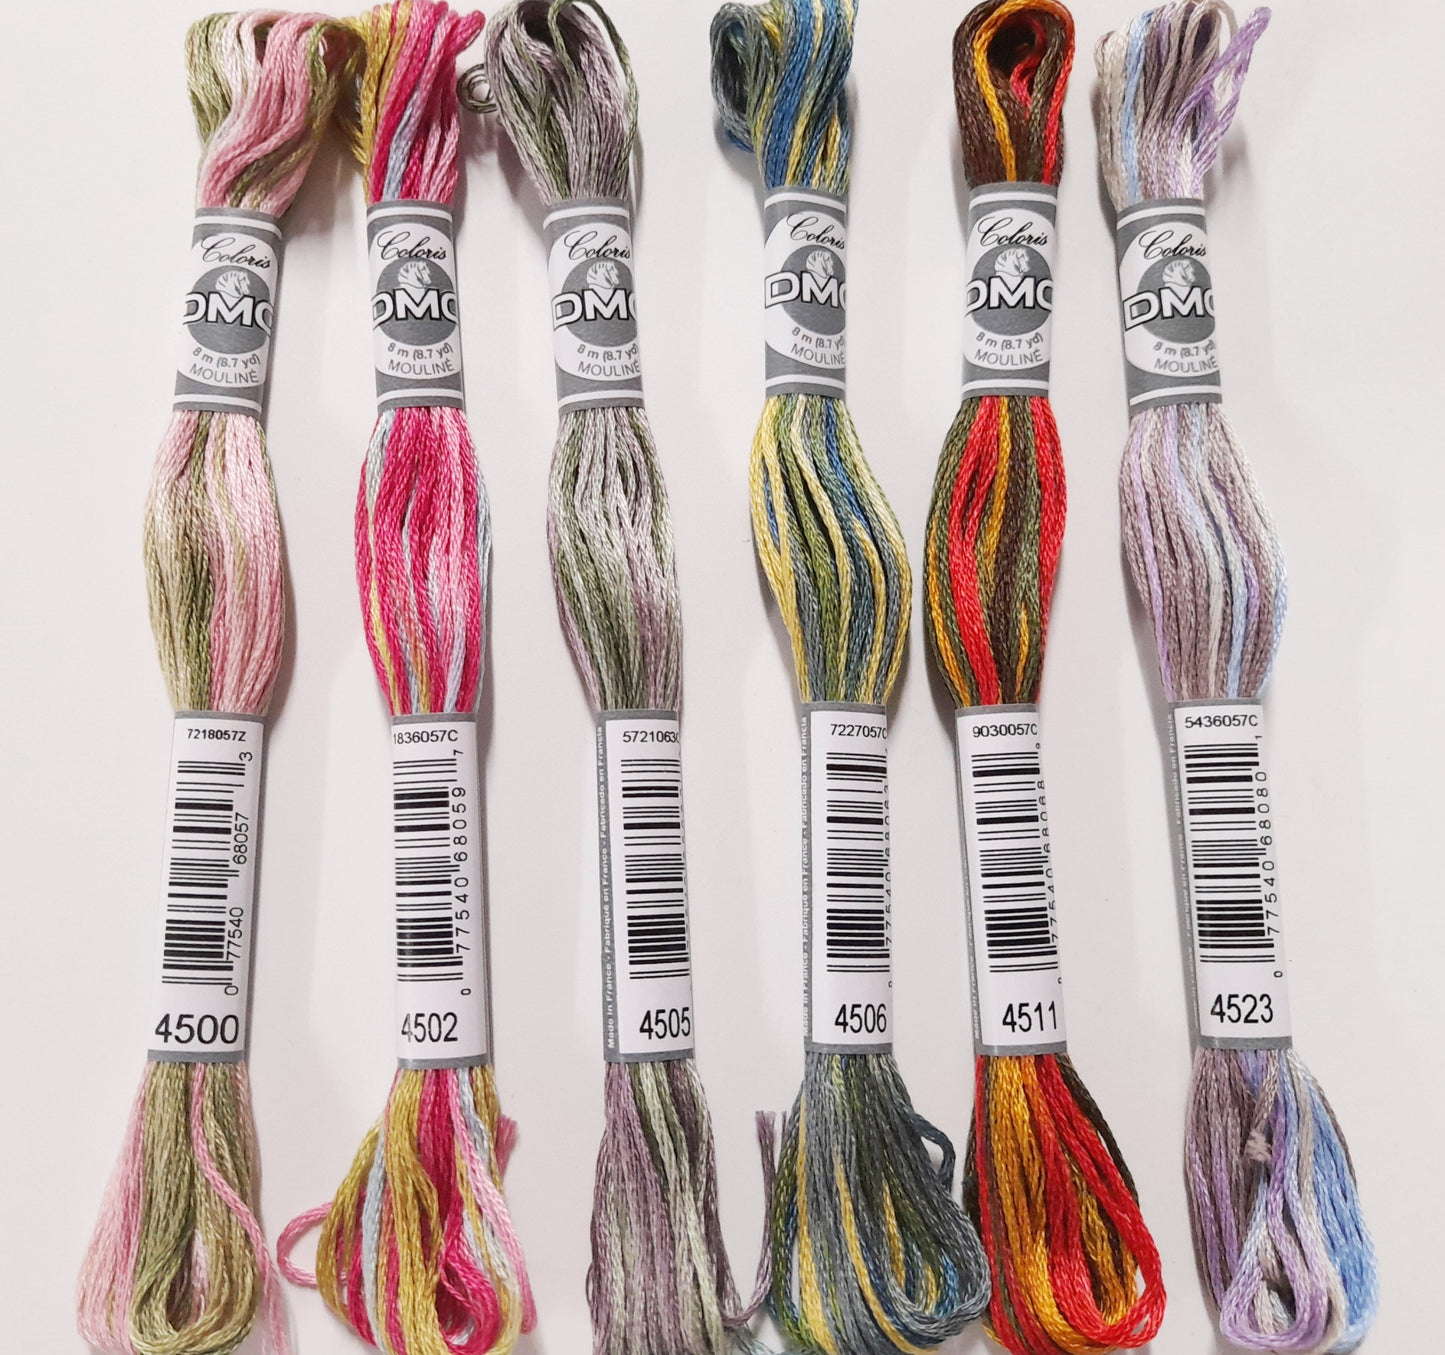 DMC Coloris variegated embroidery thread 8m skein - select your colour